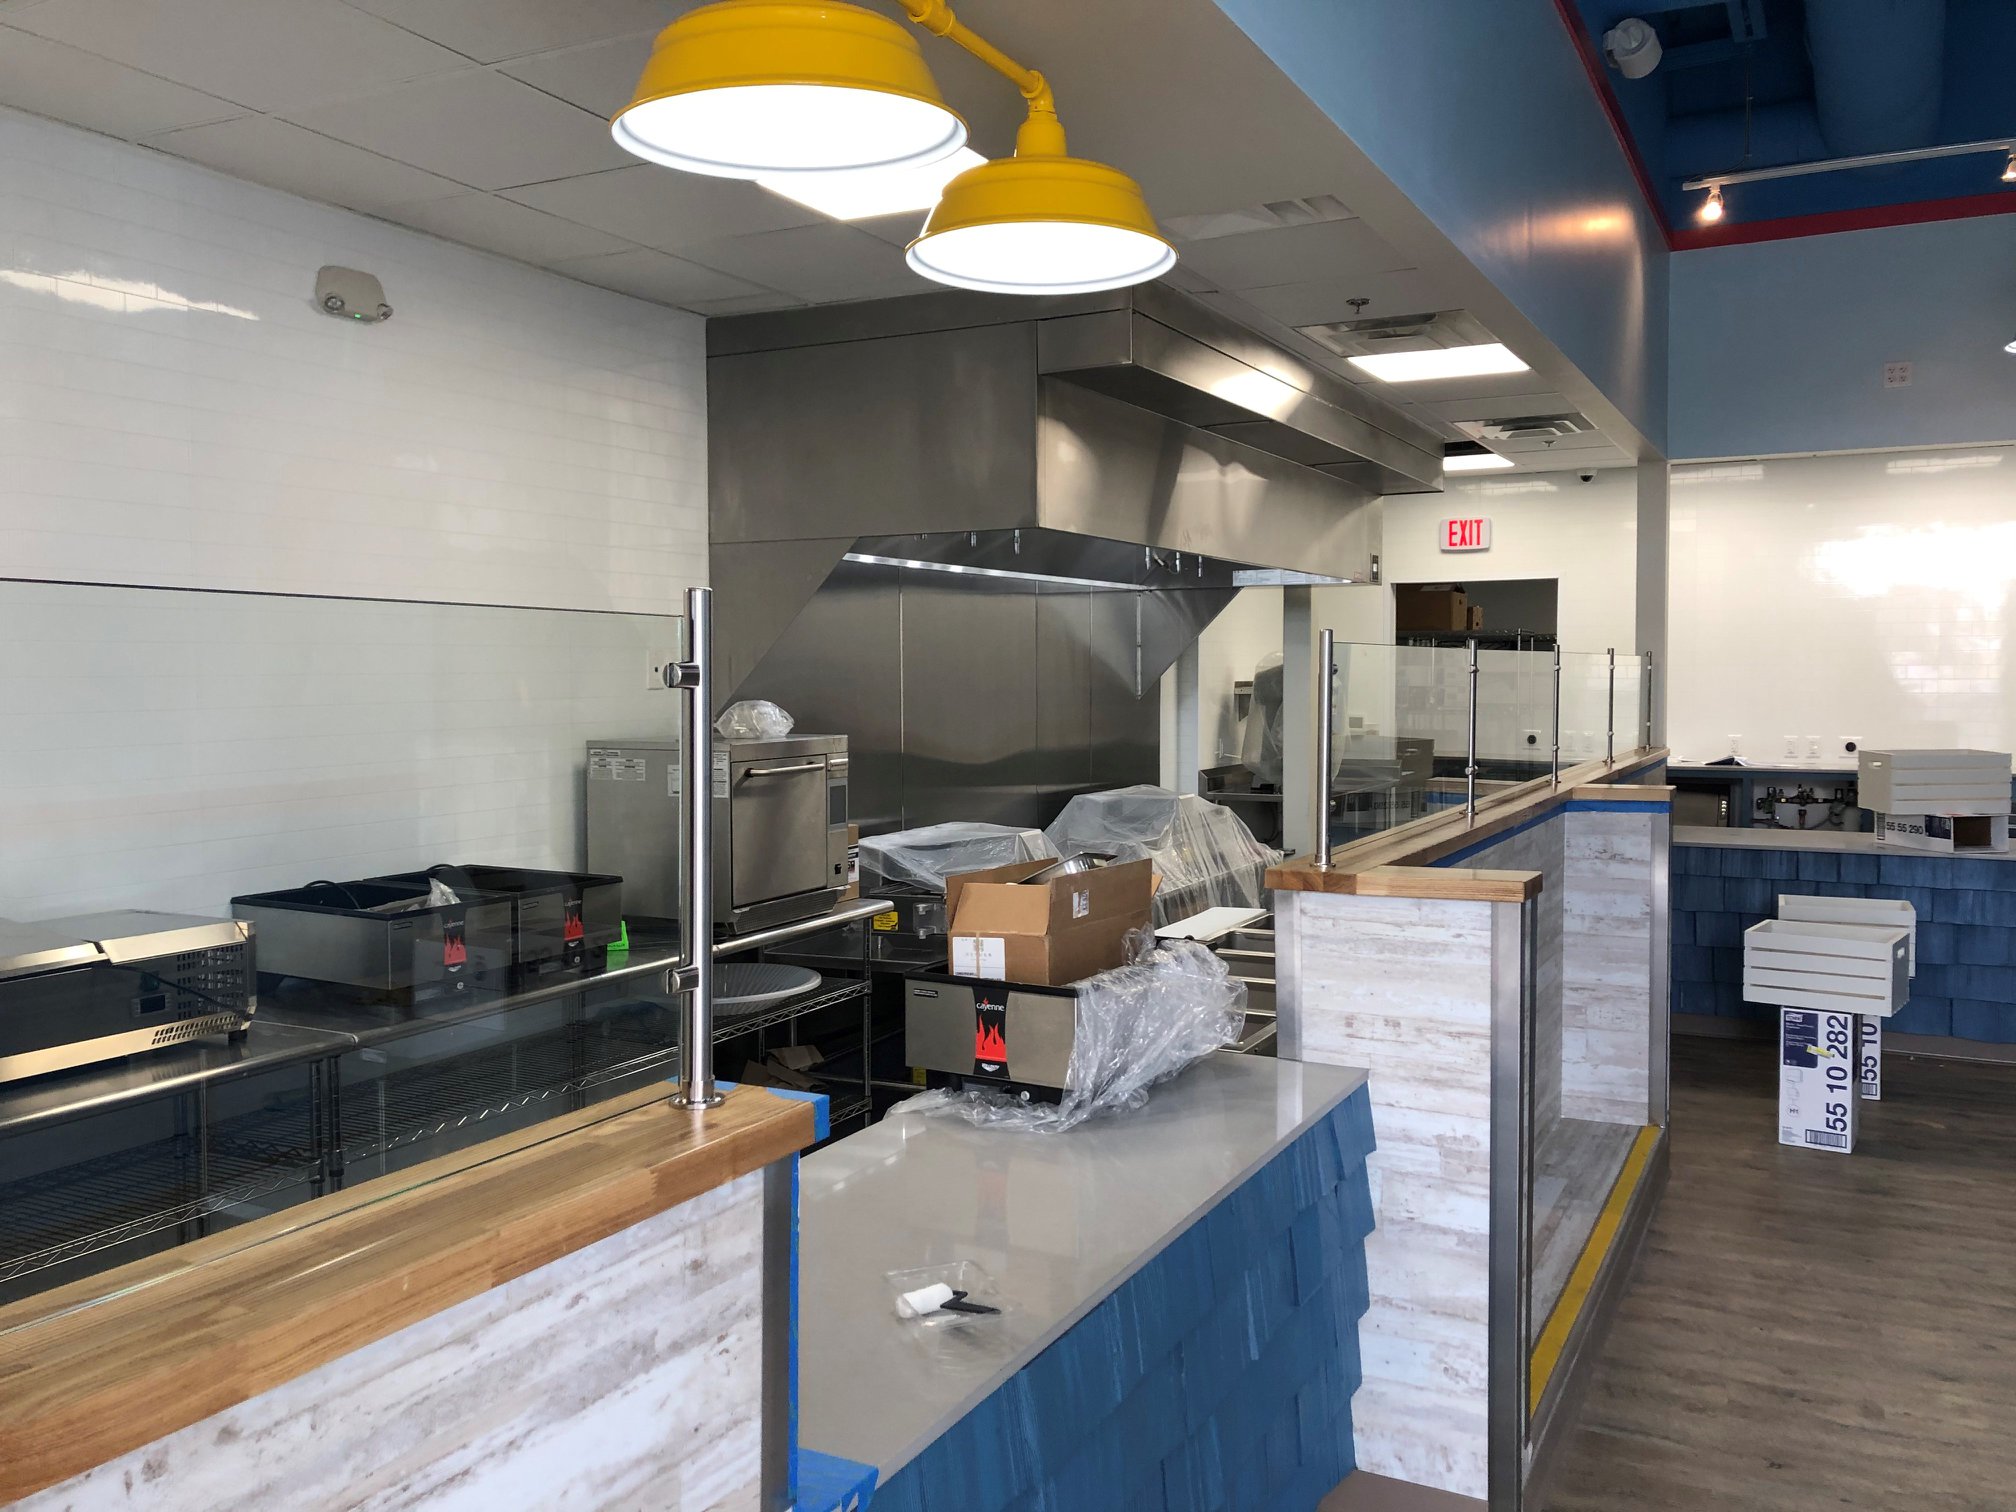 Donut shop kitchen remodel with blue and white customer counters. 